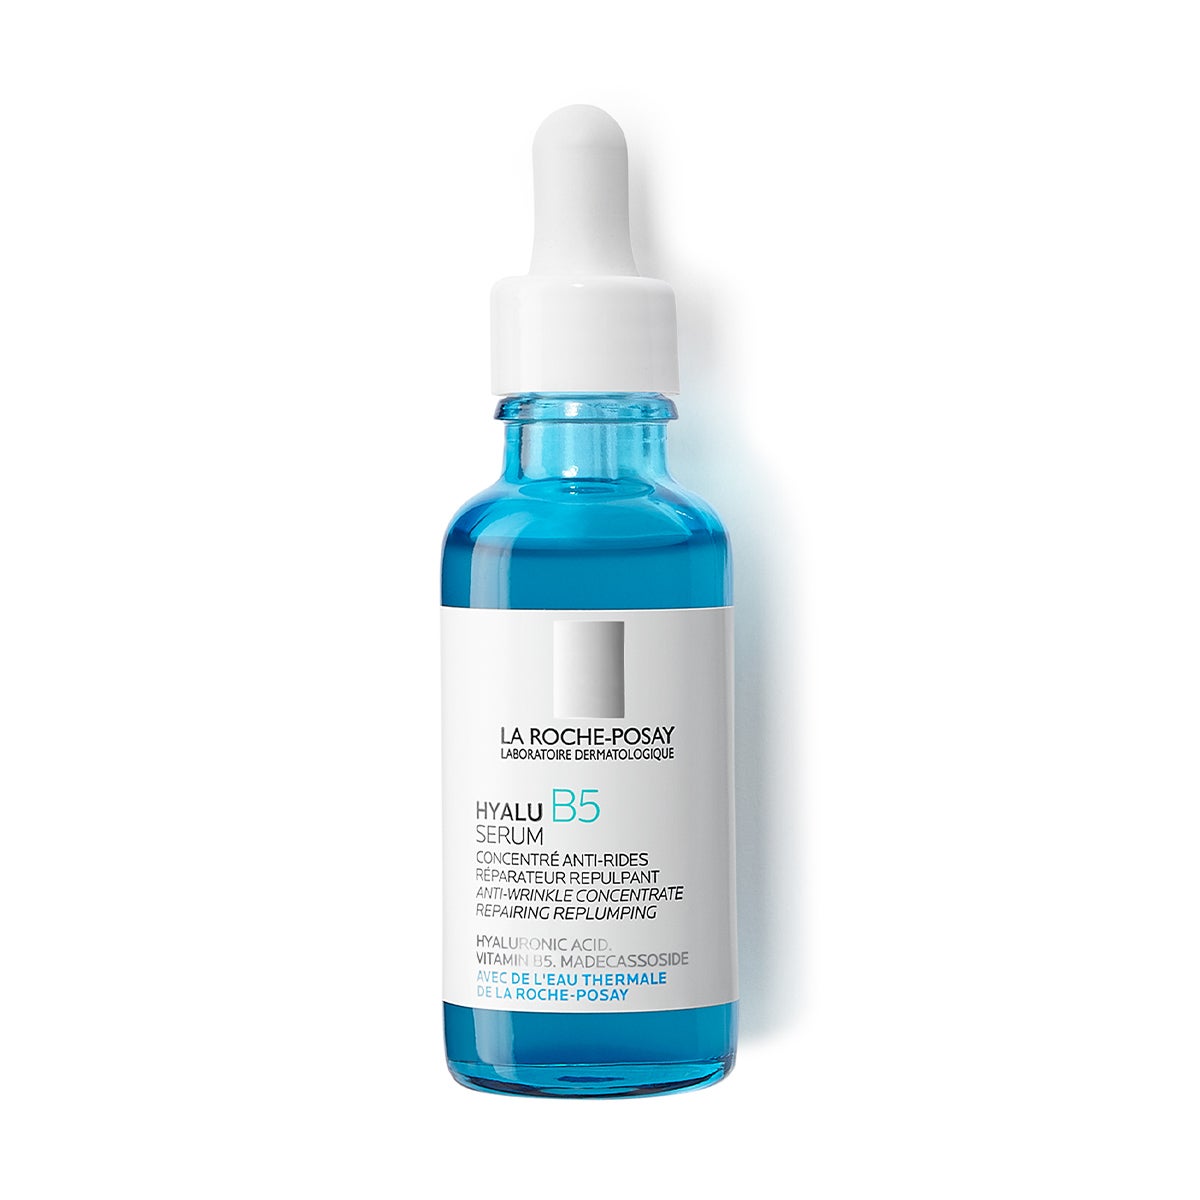 For a plumping, hydrated look and feel, opt for La Roche-Posay’s Hyalu B5 serum